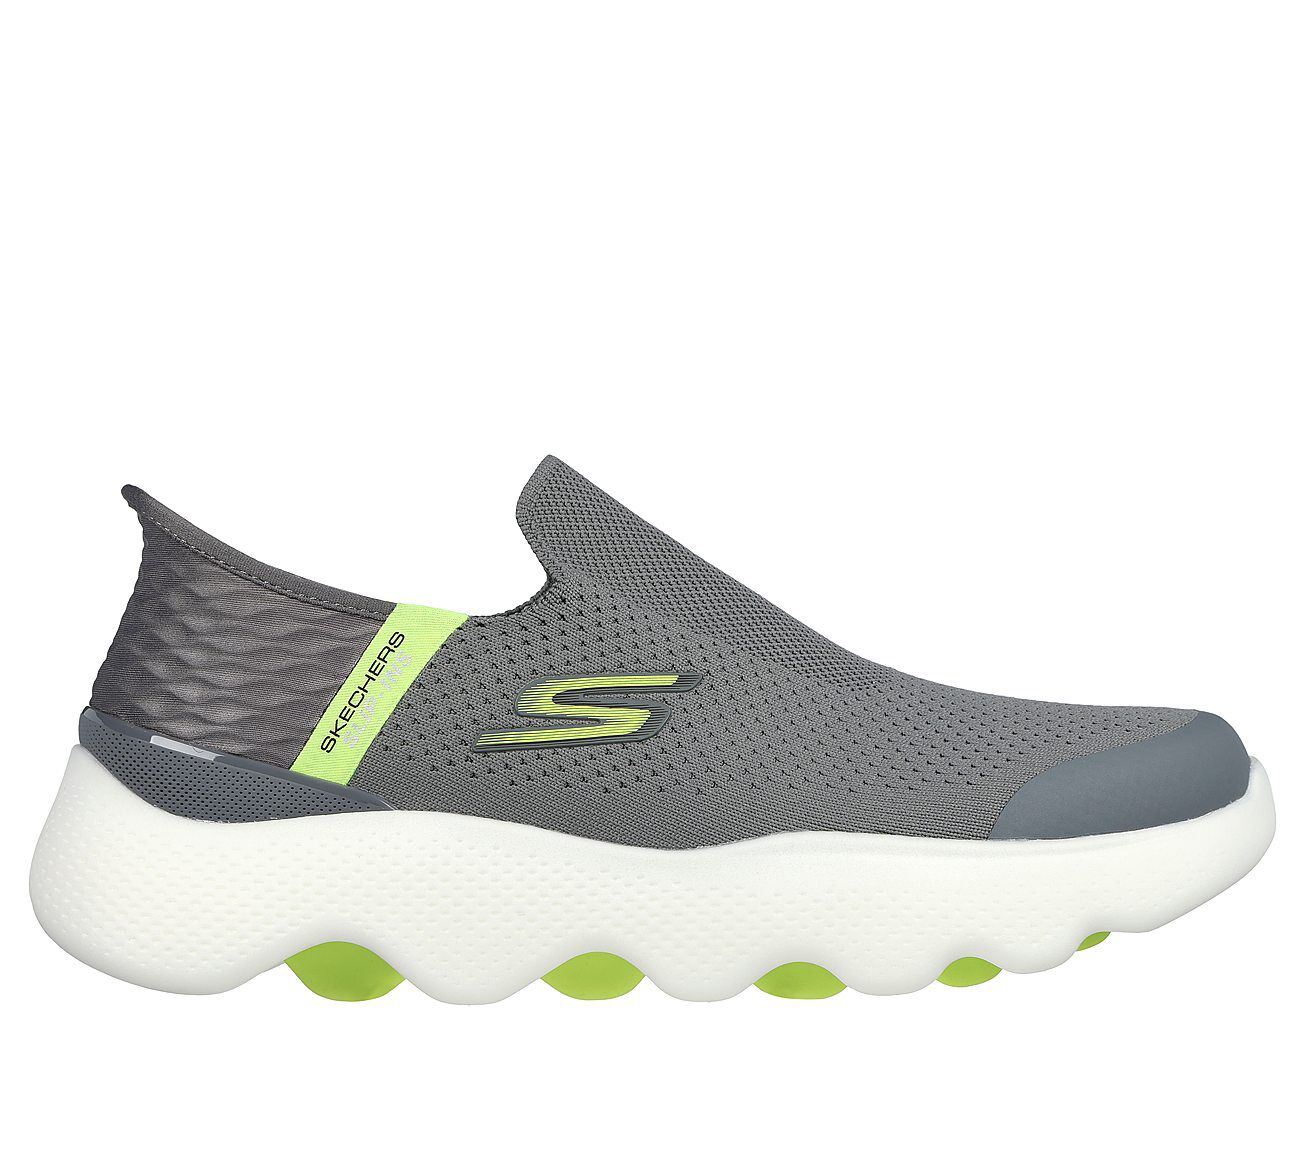 Skechers Shoes - Smiths Sports Shoes Online